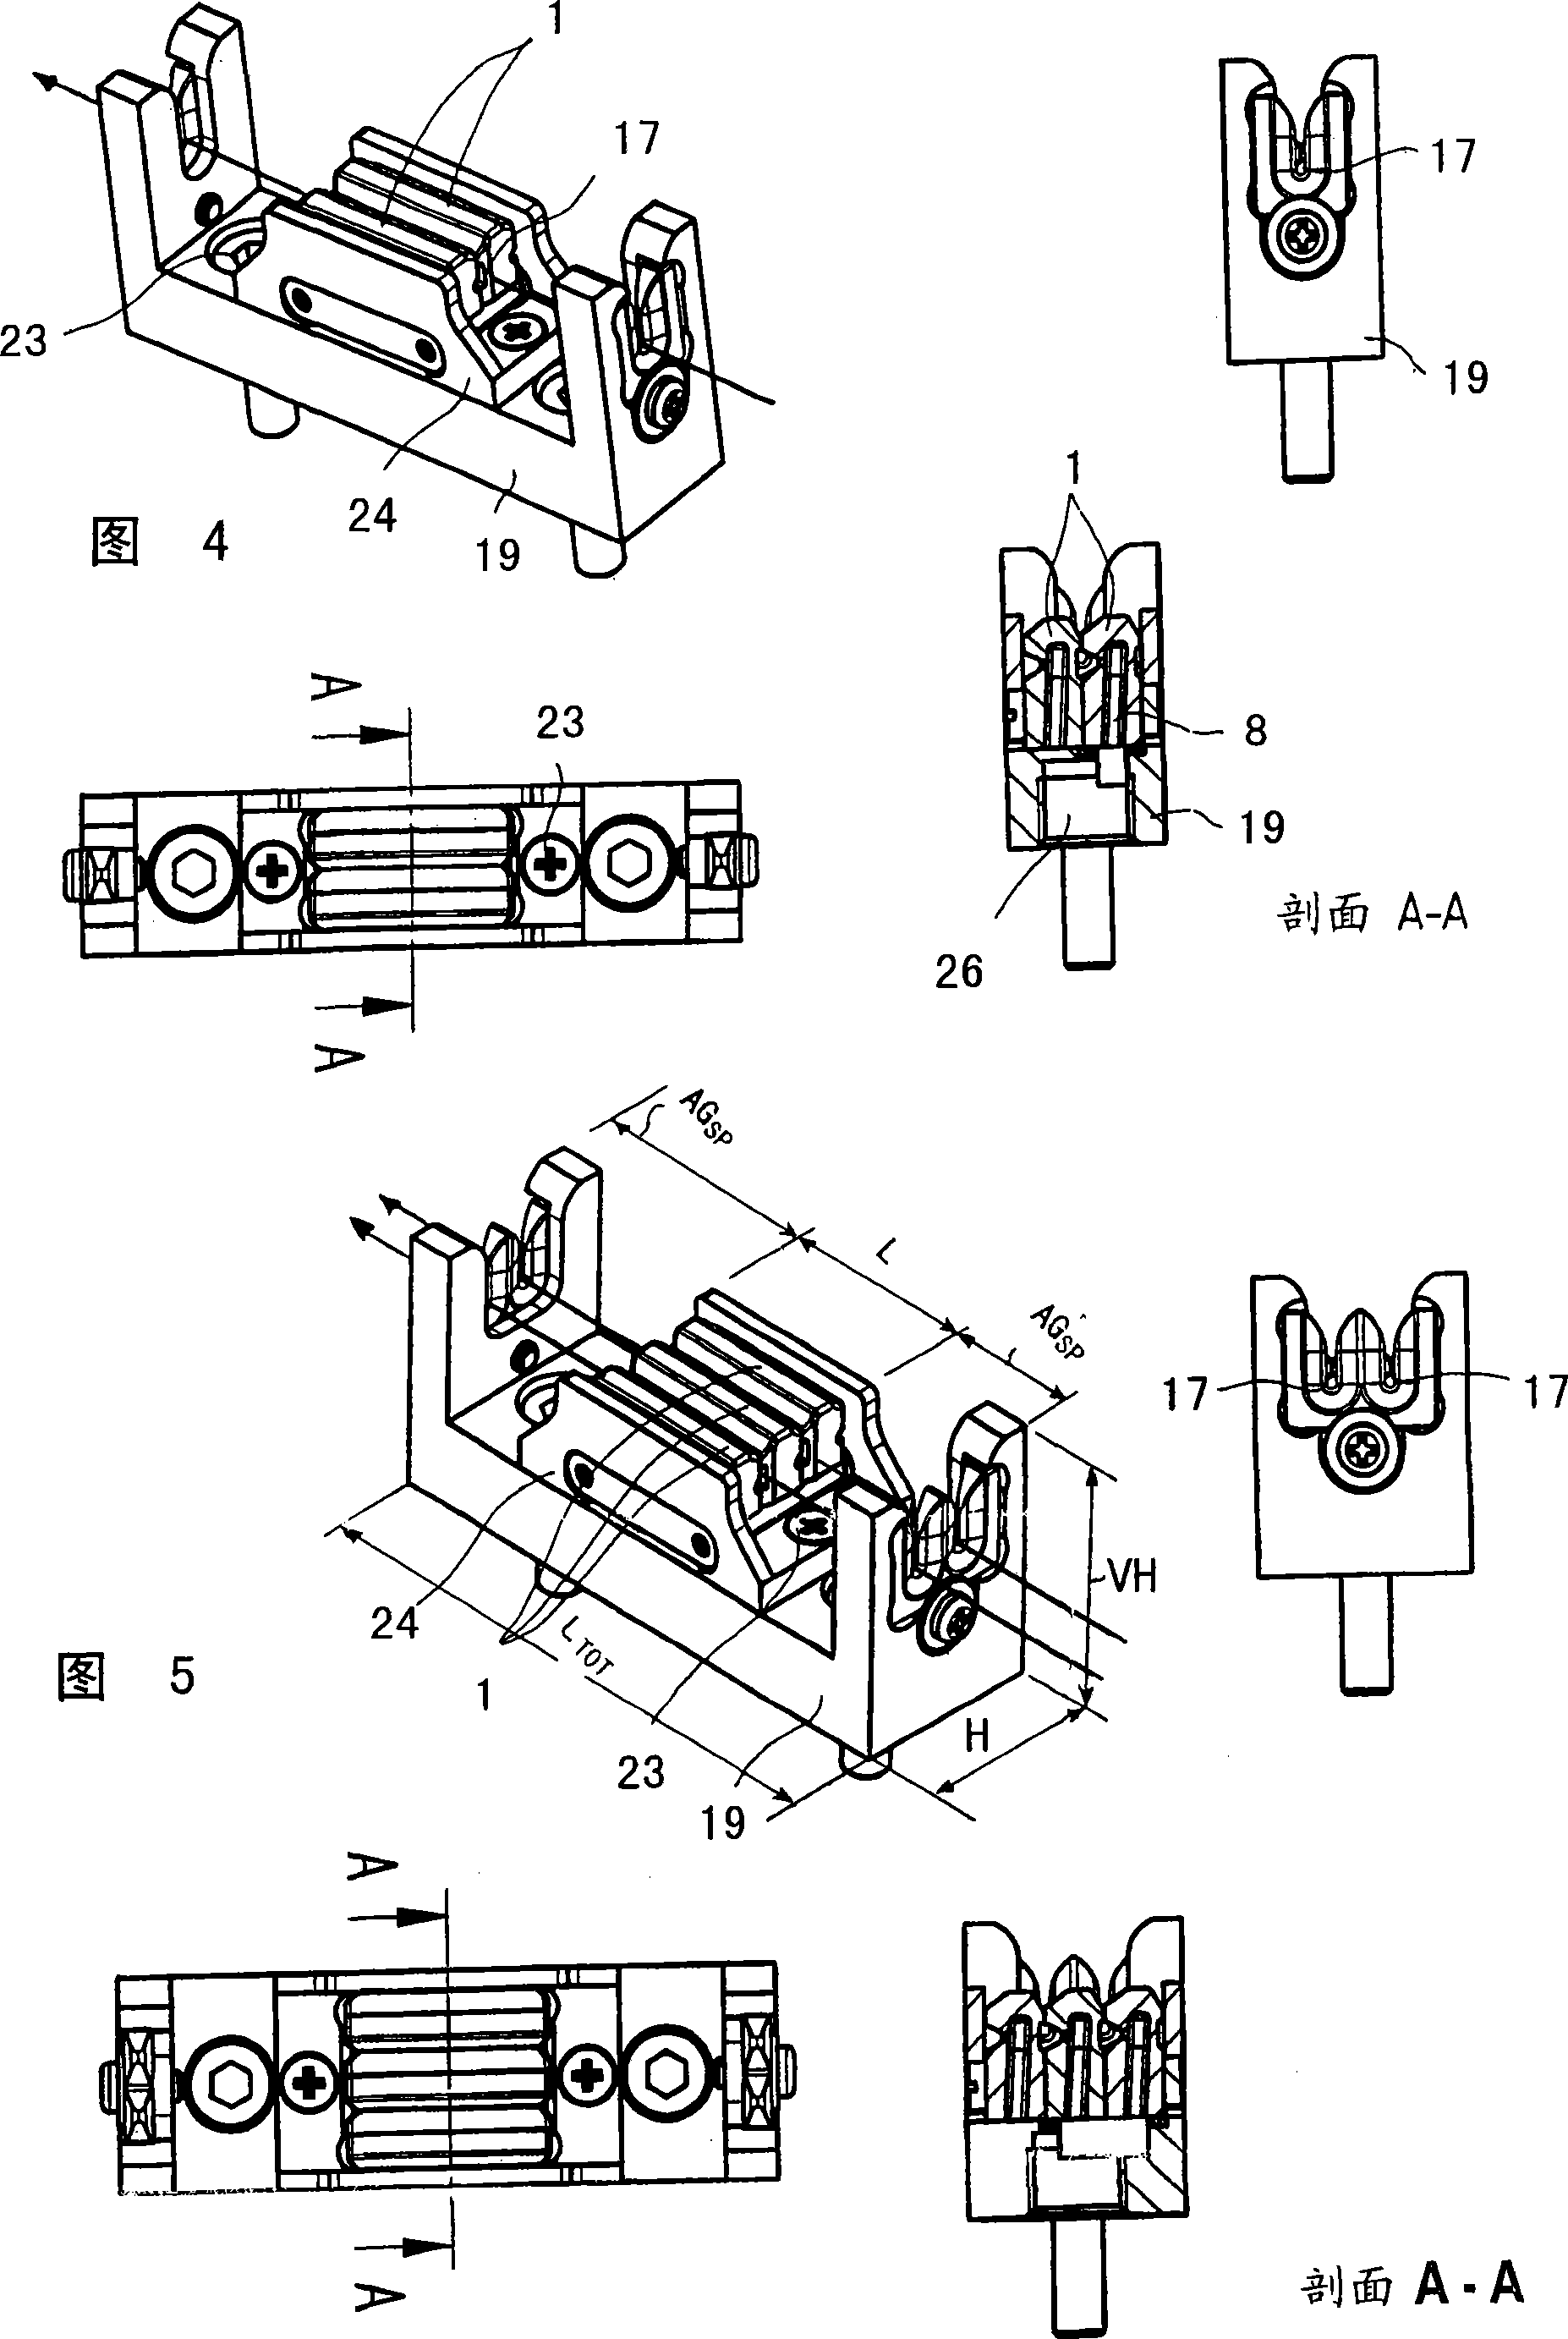 Device and method for treating filament yarn and fancy knotted, migrated, and false-twist yarn